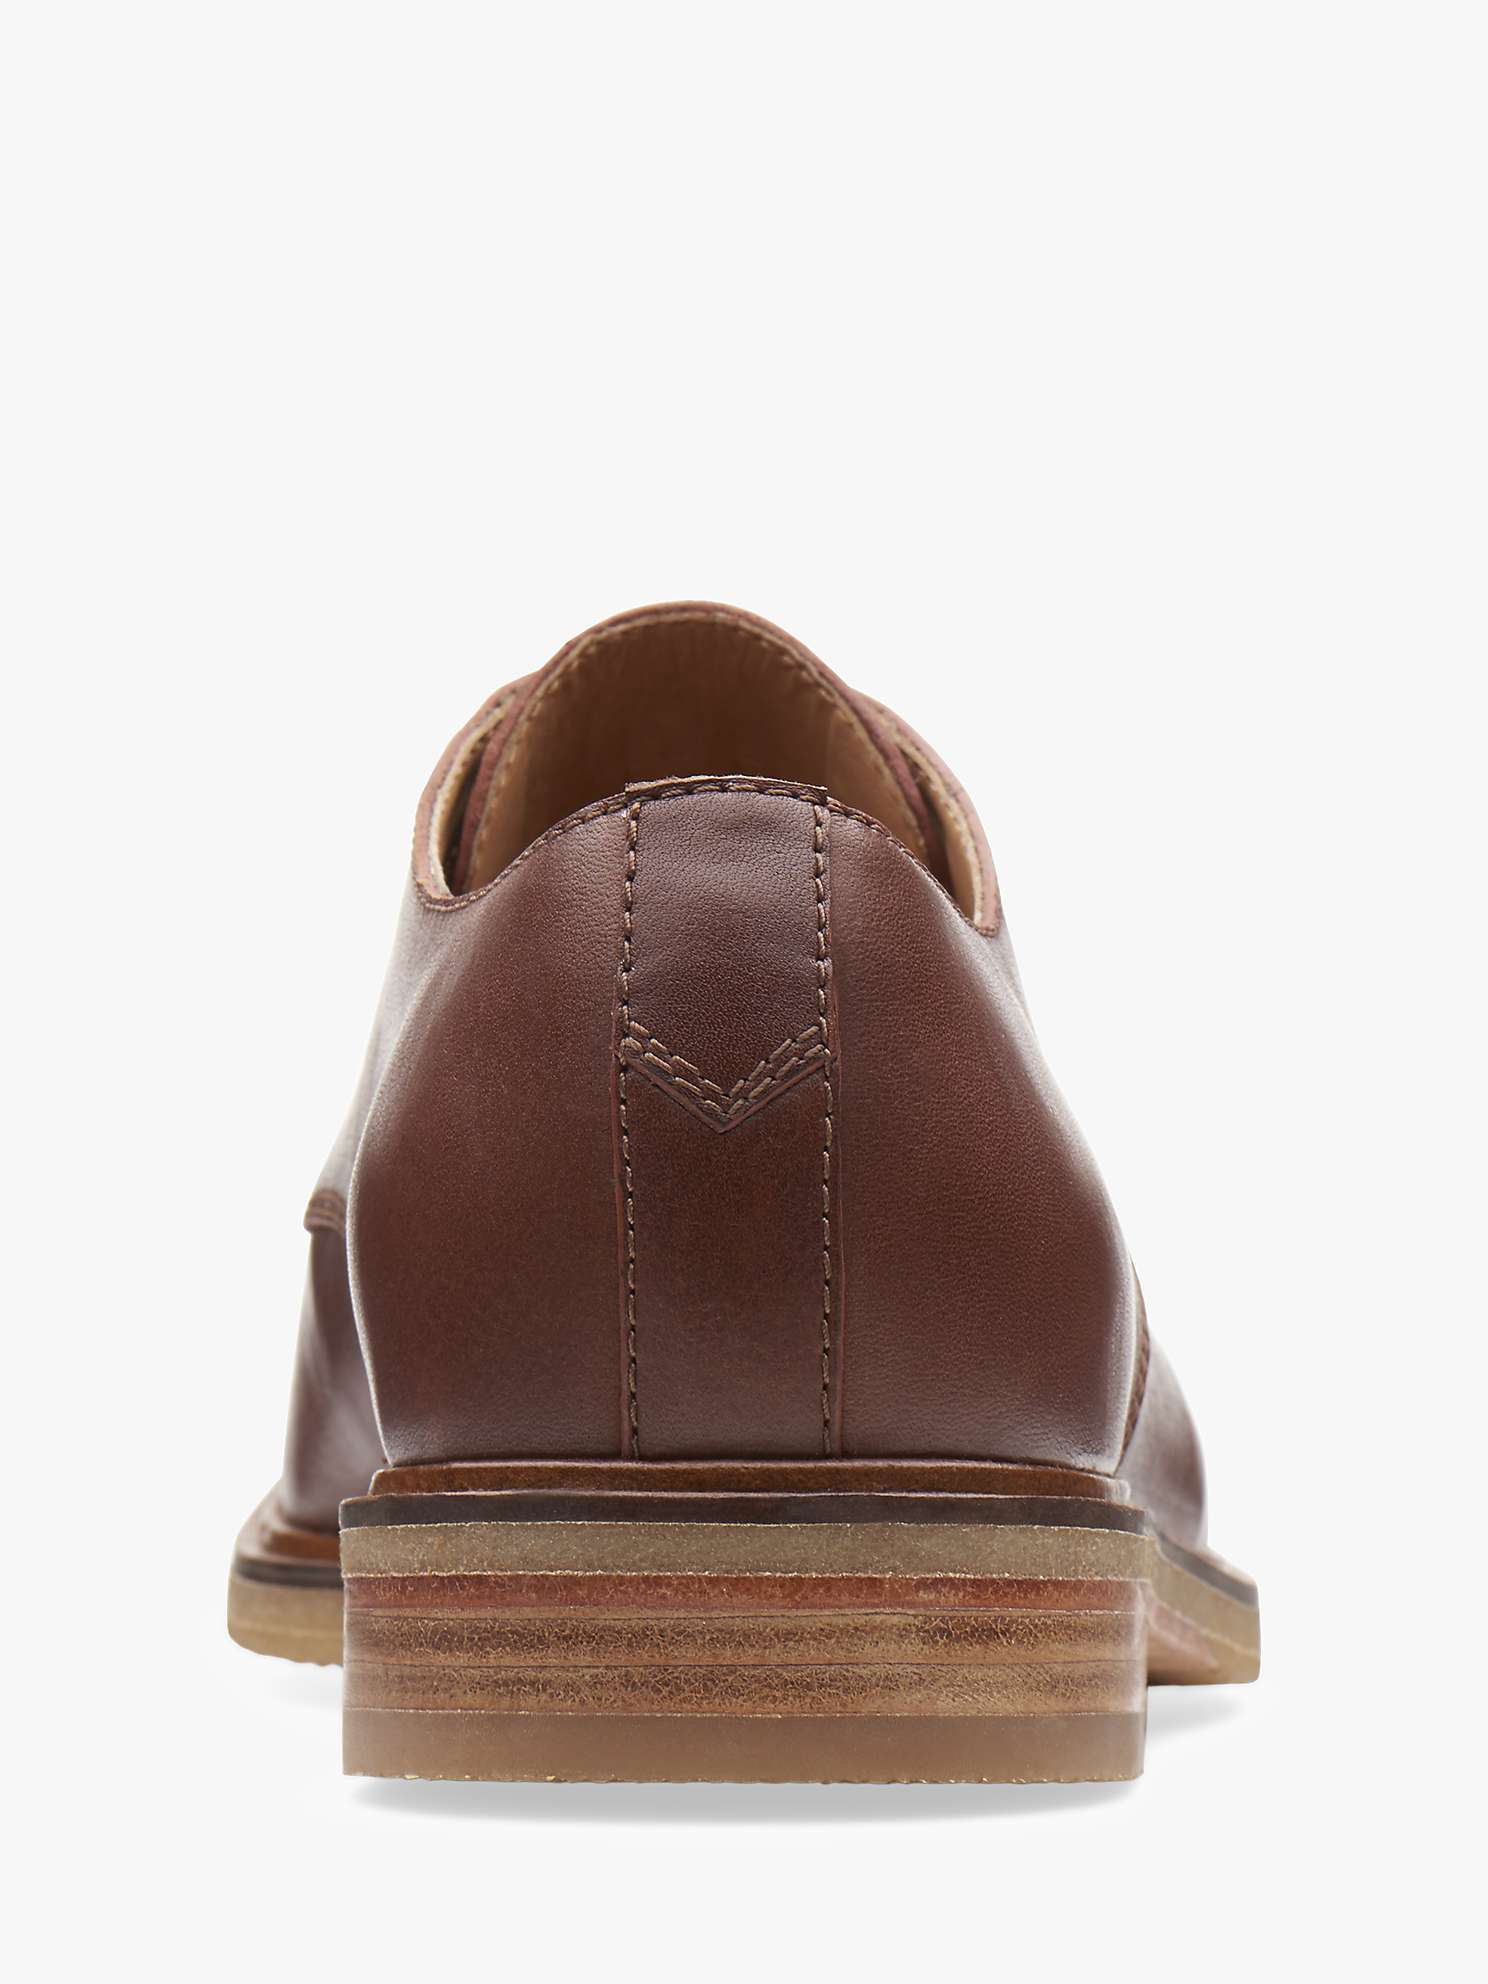 Clarks Clarkdale Moon Leather Derby Shoes, Dark Tan at John Lewis ...